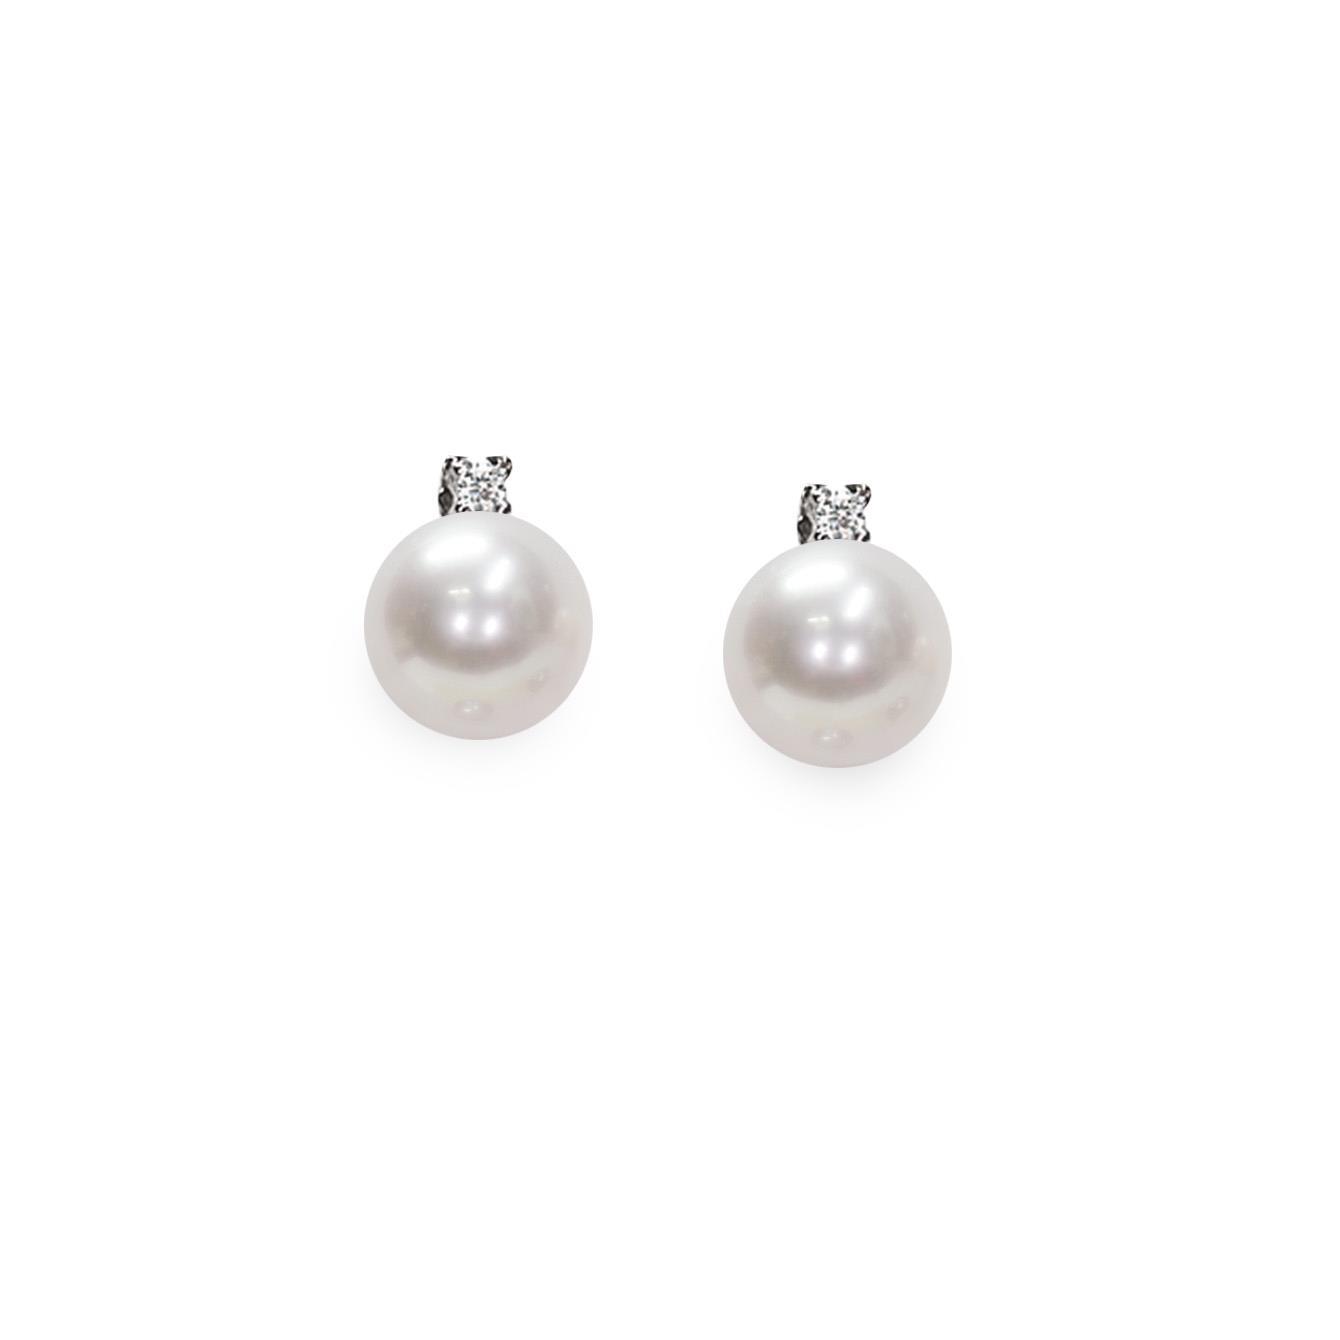 18kt white gold earrings with full pearlescent pearl and diamonds - MAYUMI